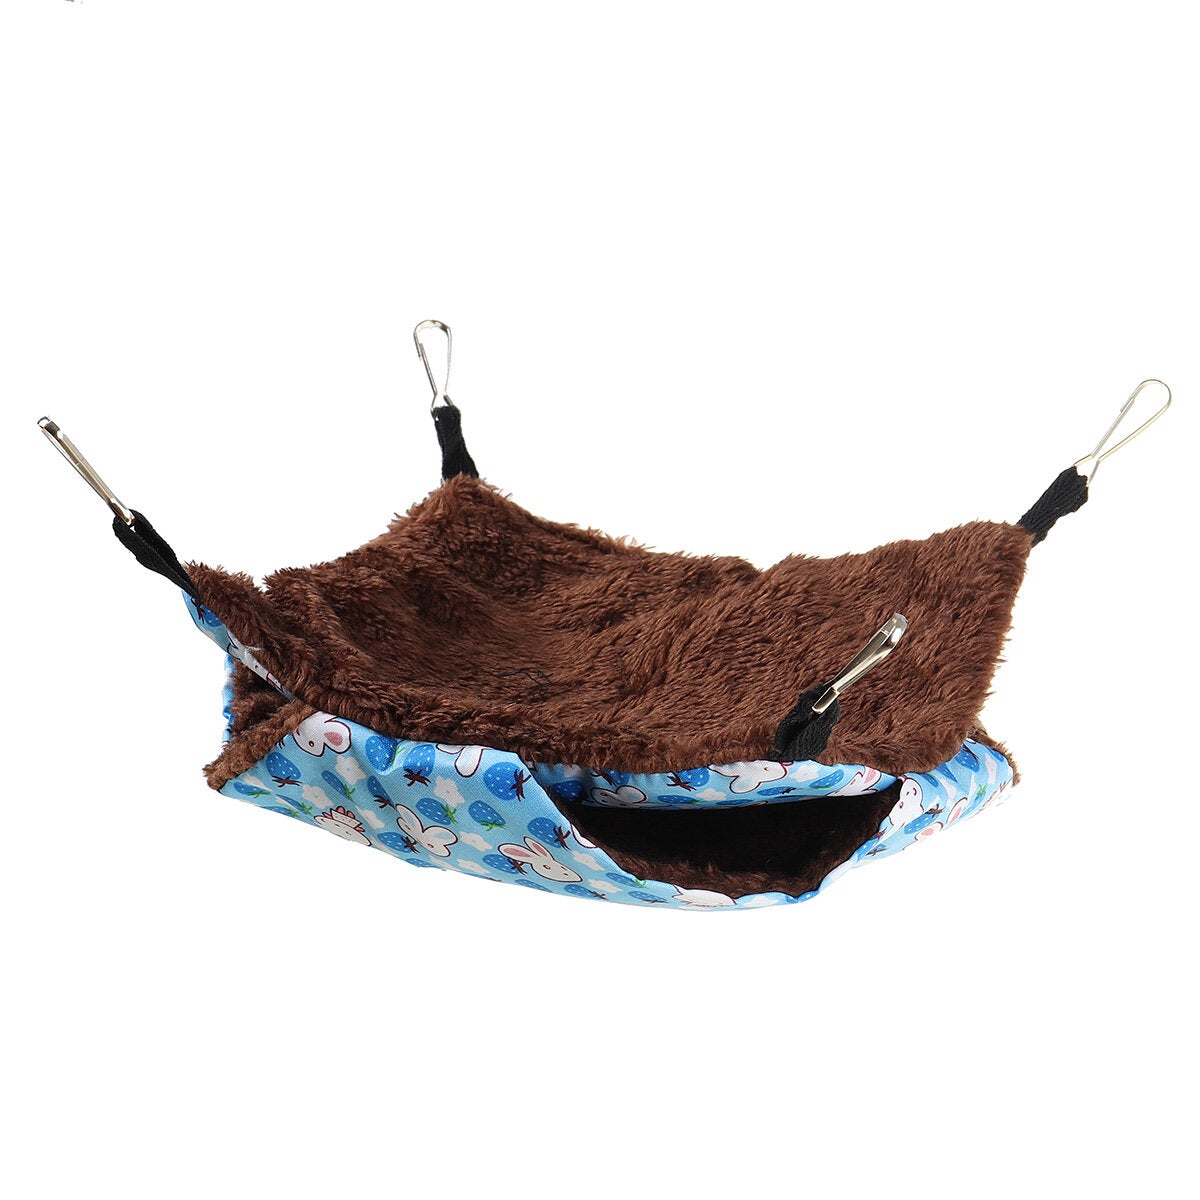 Pet Hammock Double-Layer Plush Fleece Soft Hanging Nests Sleeping Bed for Pet Home Decoration